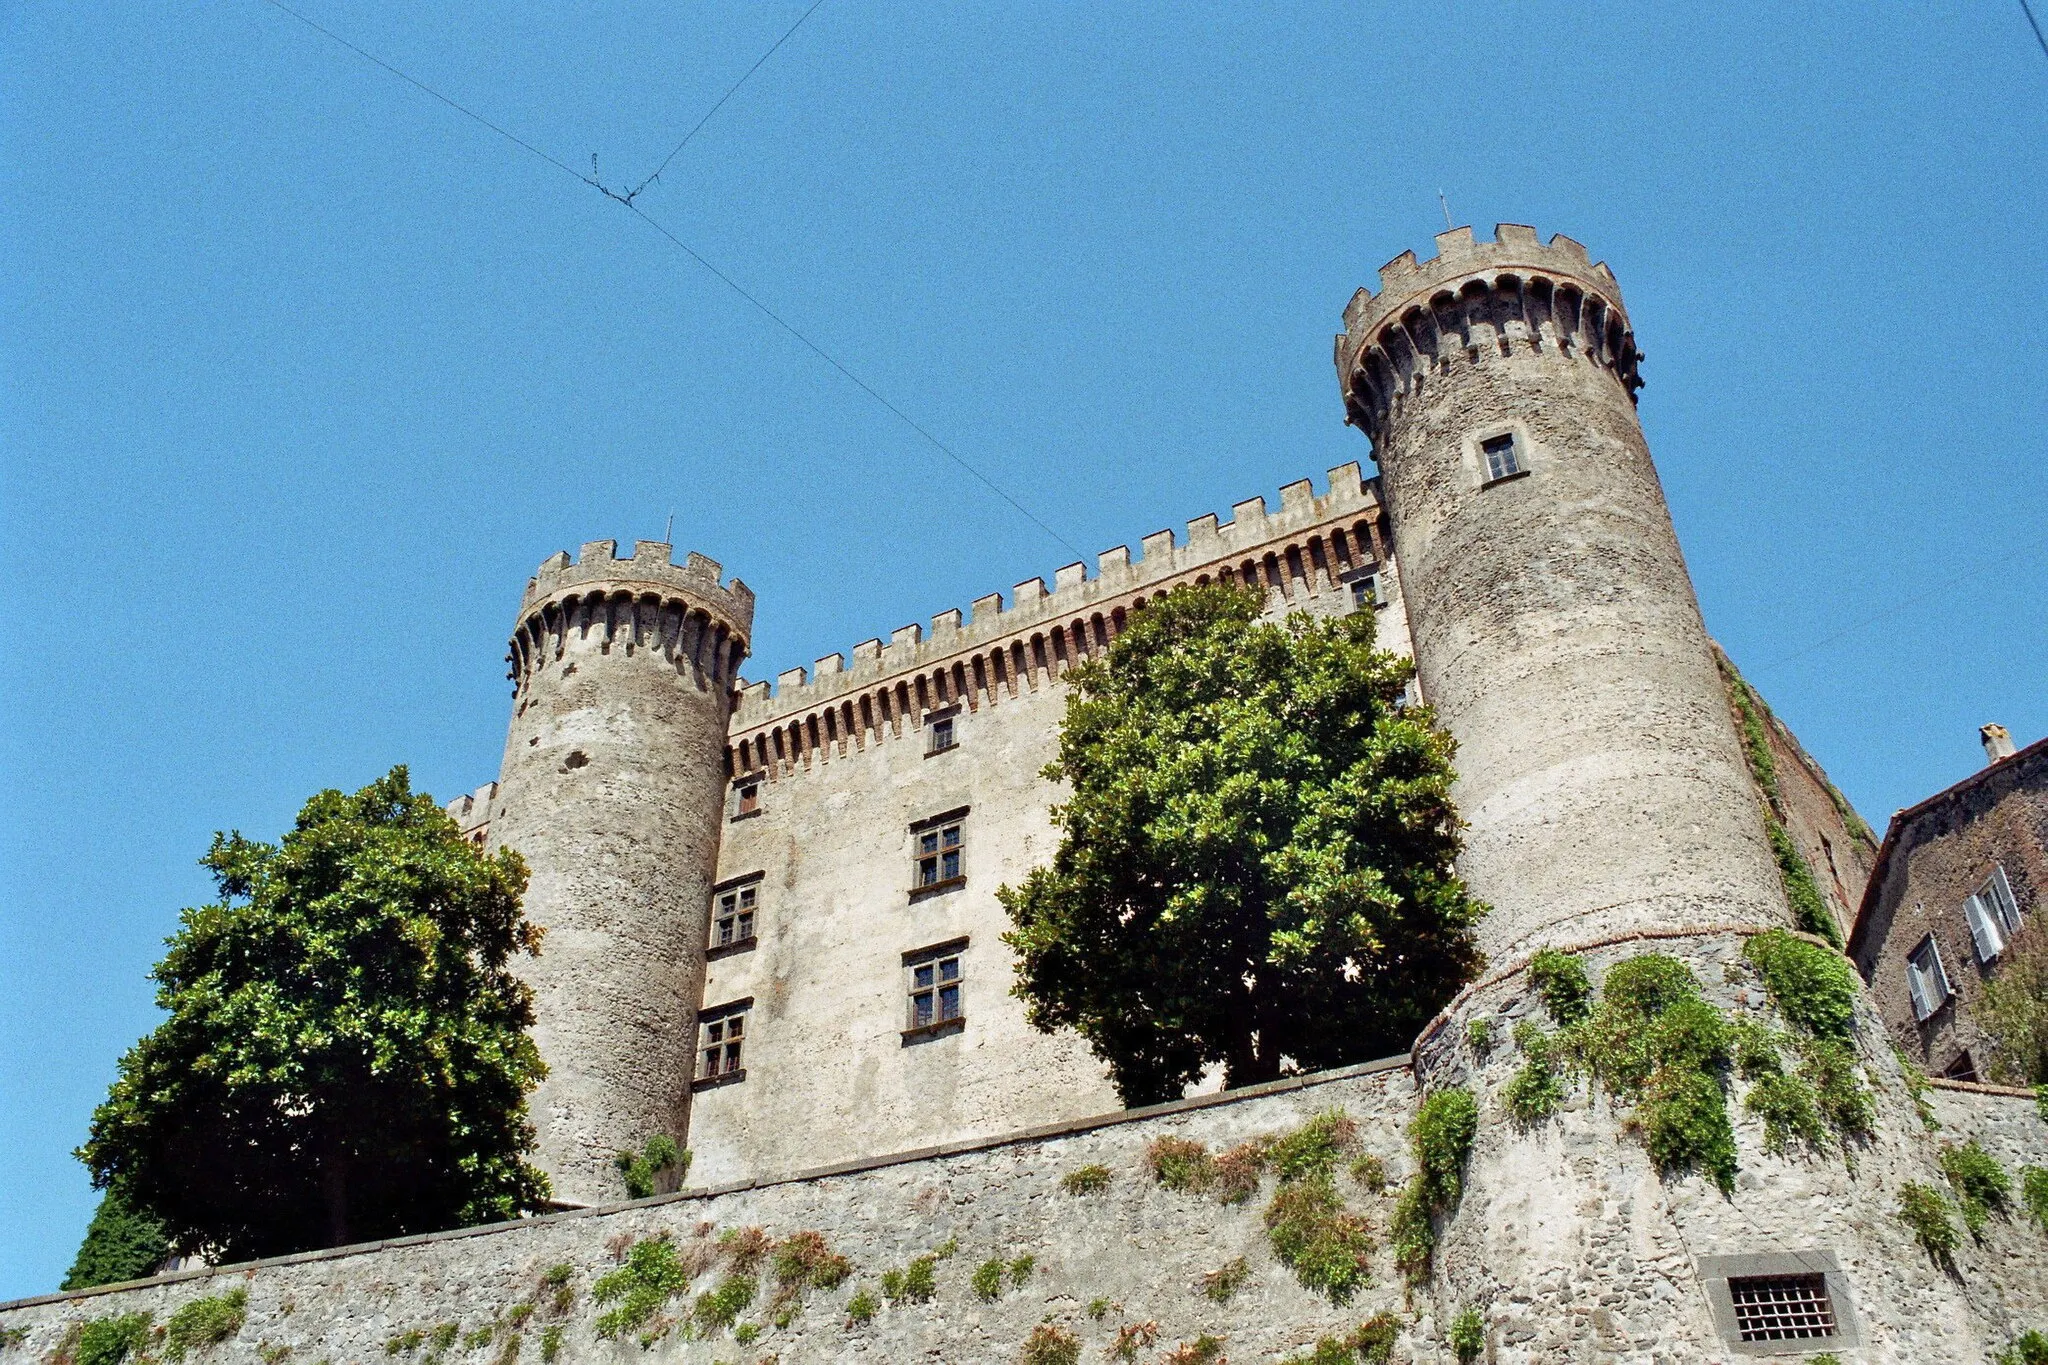 Photo showing: Orsini-Odescalchi Castle in Bracciano, Italy, from below